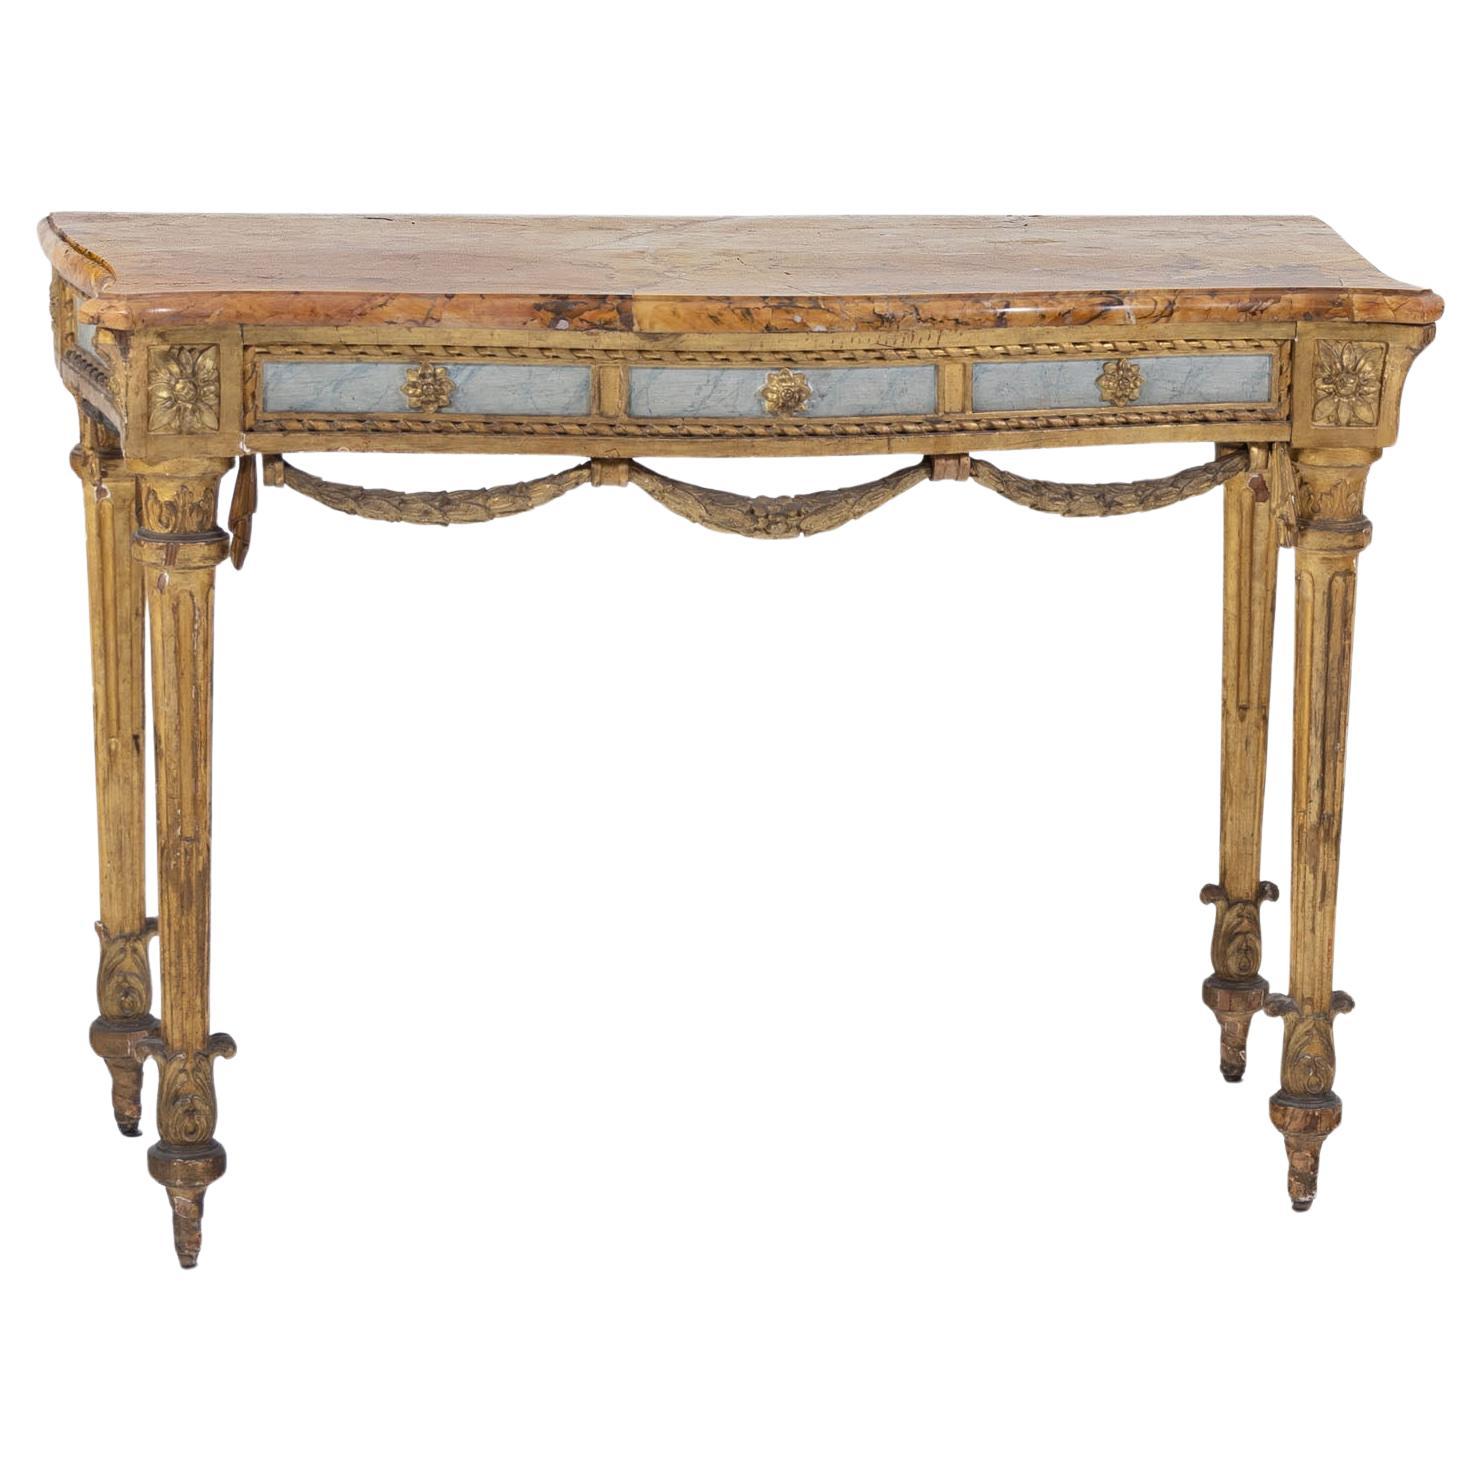 Pair of partially gilded consoles on high conical legs with tendril decoration. The frame is decorated with hanging festoons and set off in light blue. In between, rosettes and twisted profile moldings give the consoles an elegant character. The